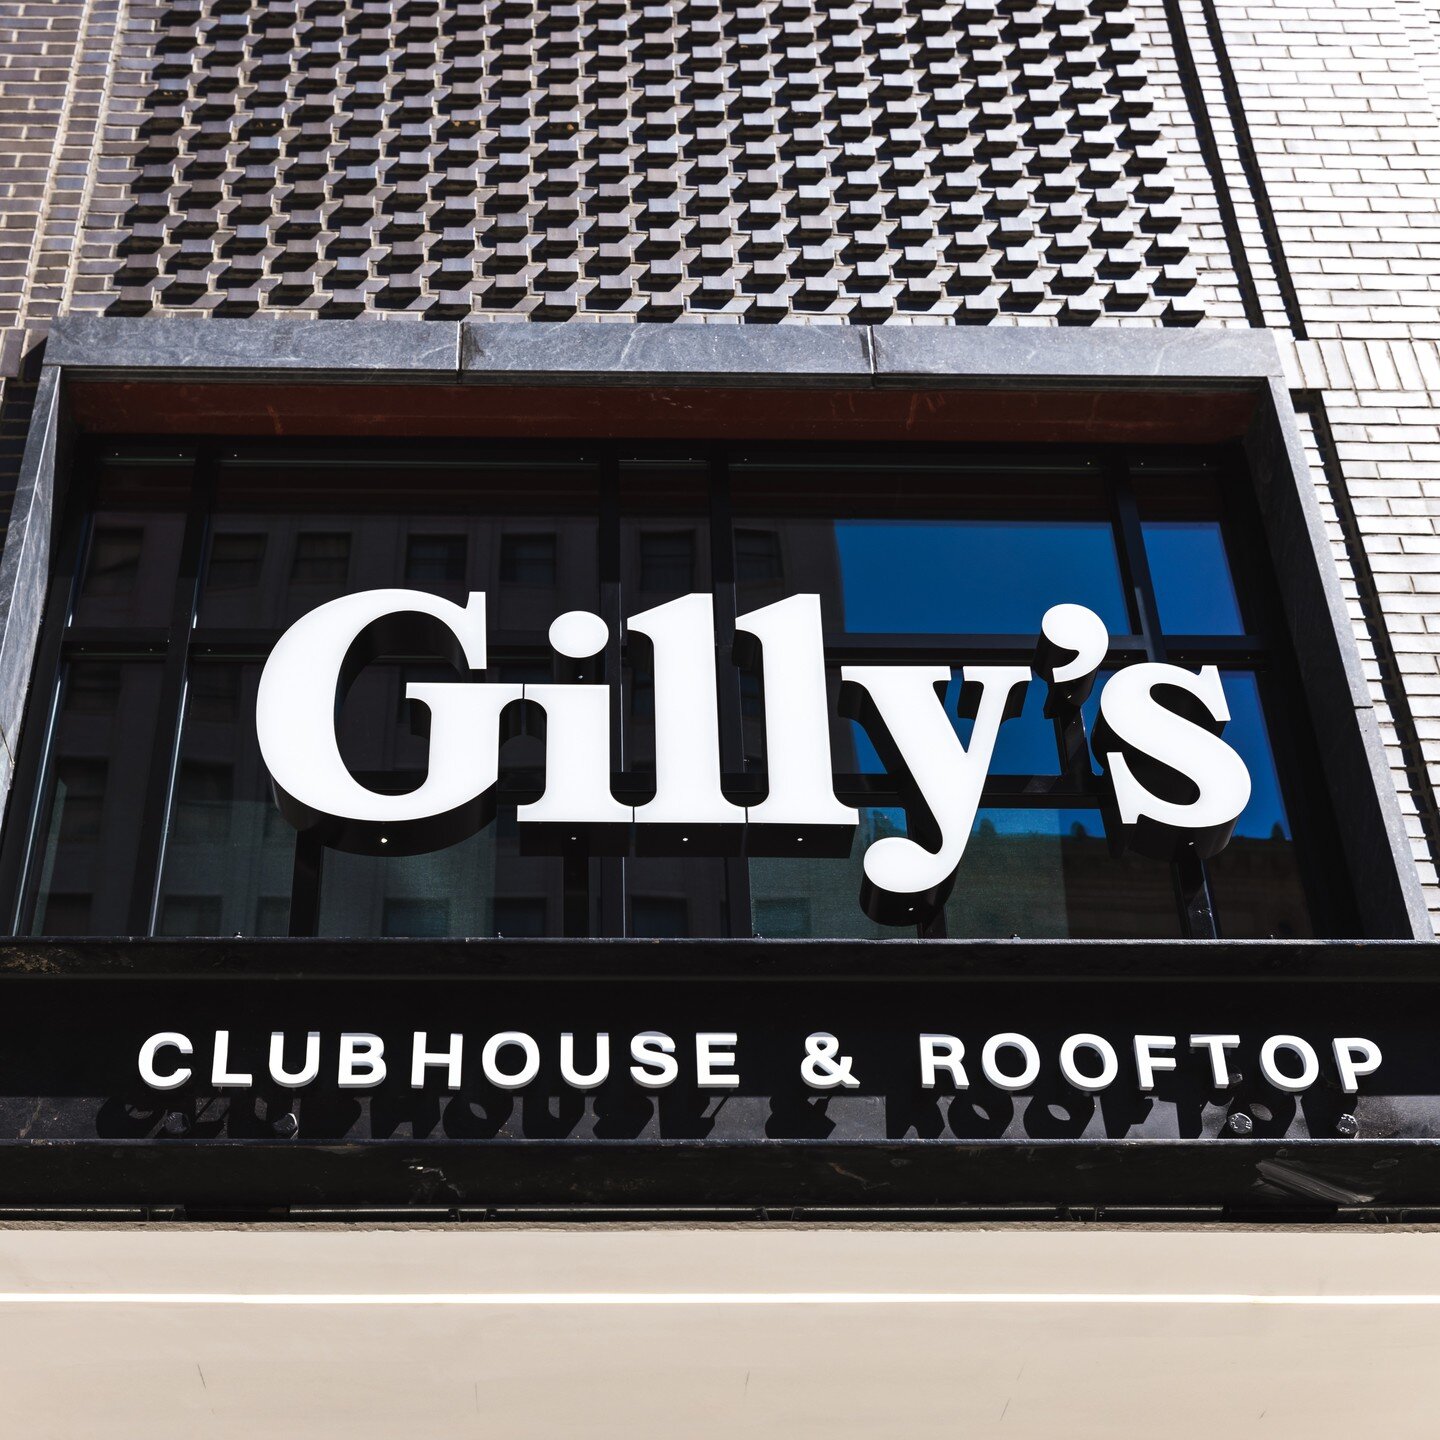 Located in the heart of downtown Detroit, @gillysdetroit will be open tomorrow, April 5 to celebrate Detroit Tigers opening day starting at 10am! 

Head down to enjoy creative cocktails and delicious food while watching @tigers on the big screen and 